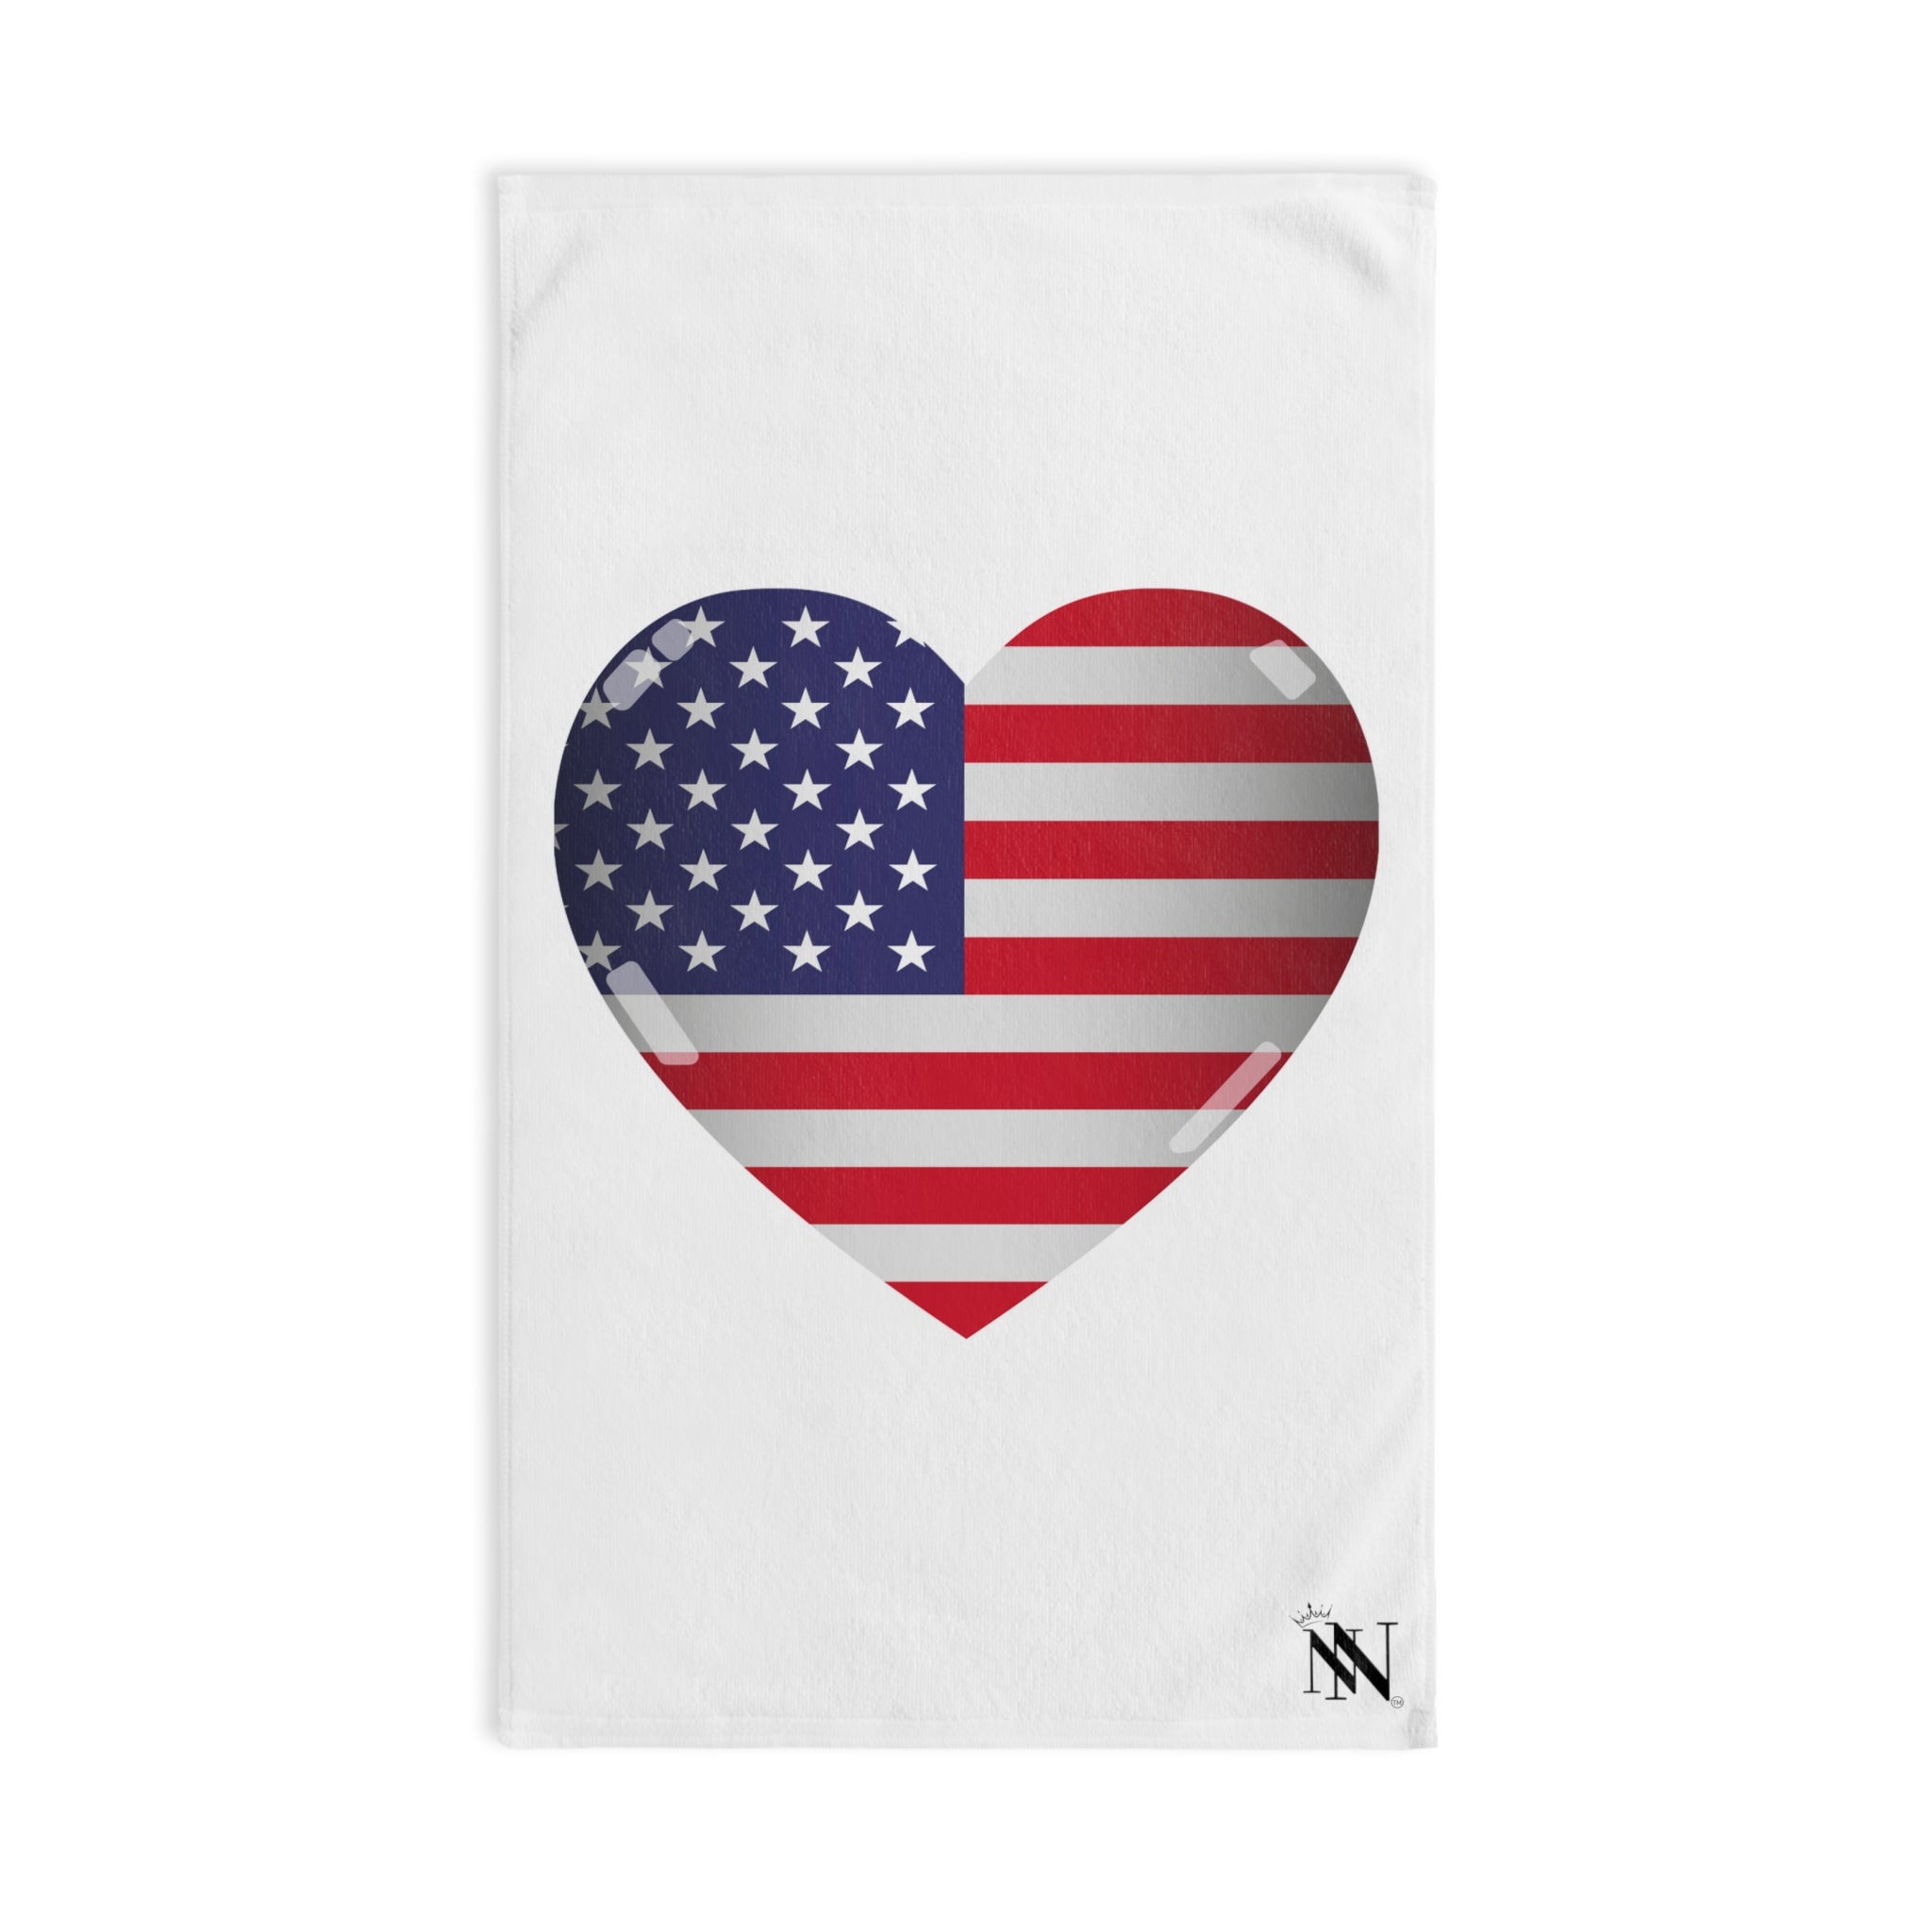 American Flag White | Funny Gifts for Men - Gifts for Him - Birthday Gifts for Men, Him, Her, Husband, Boyfriend, Girlfriend, New Couple Gifts, Fathers & Valentines Day Gifts, Christmas Gifts NECTAR NAPKINS